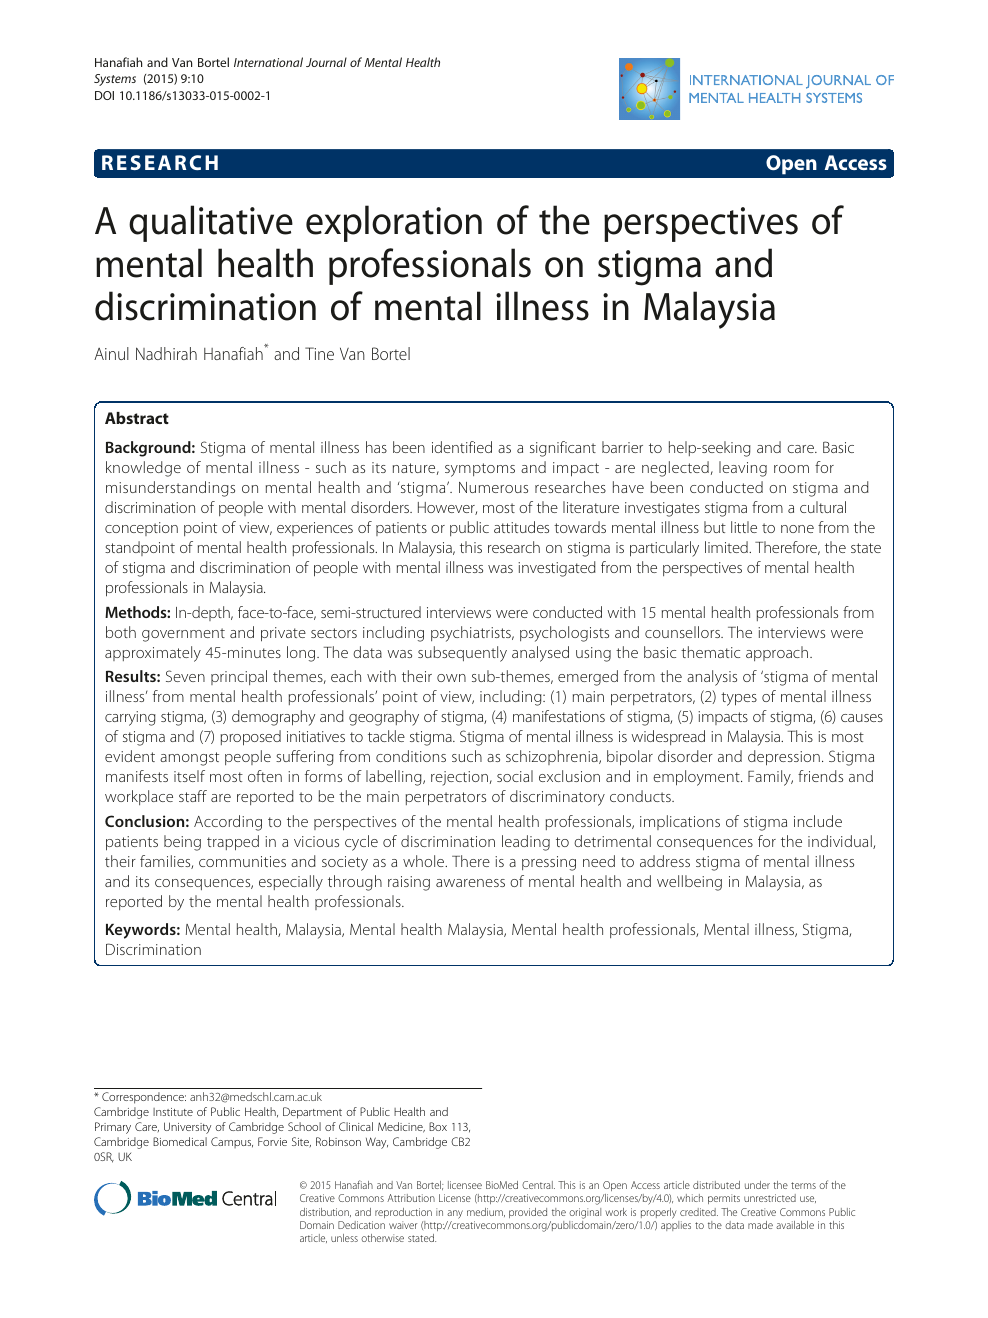 A Qualitative Exploration Of The Perspectives Of Mental Health Professionals On Stigma And Discrimination Of Mental Illness In Malaysia Topic Of Research Paper In Psychology Download Scholarly Article Pdf And Read